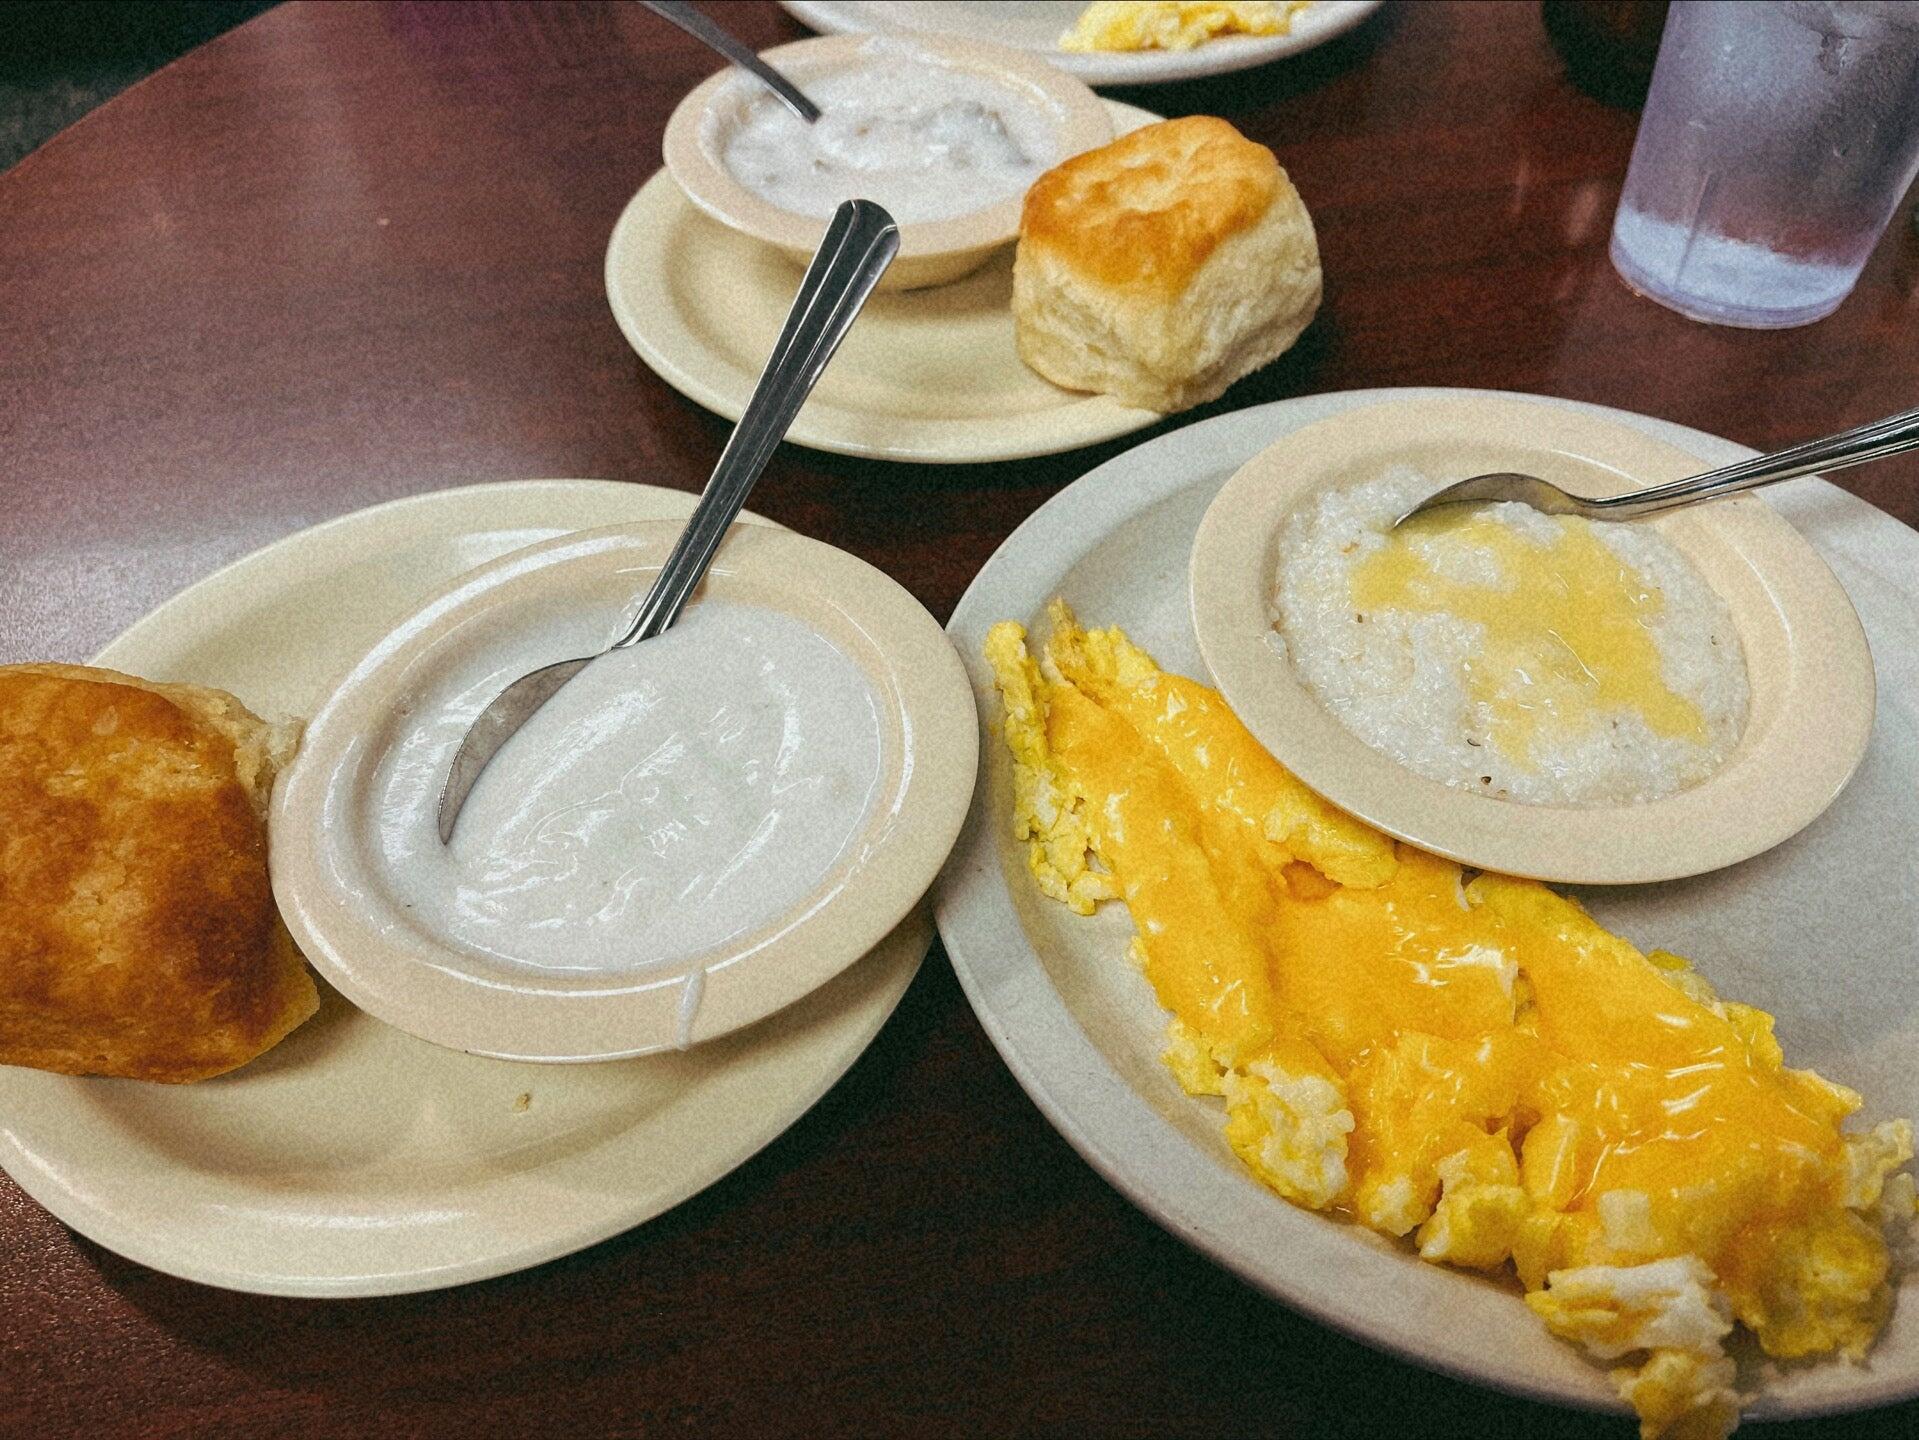 The Nashville Biscuit House